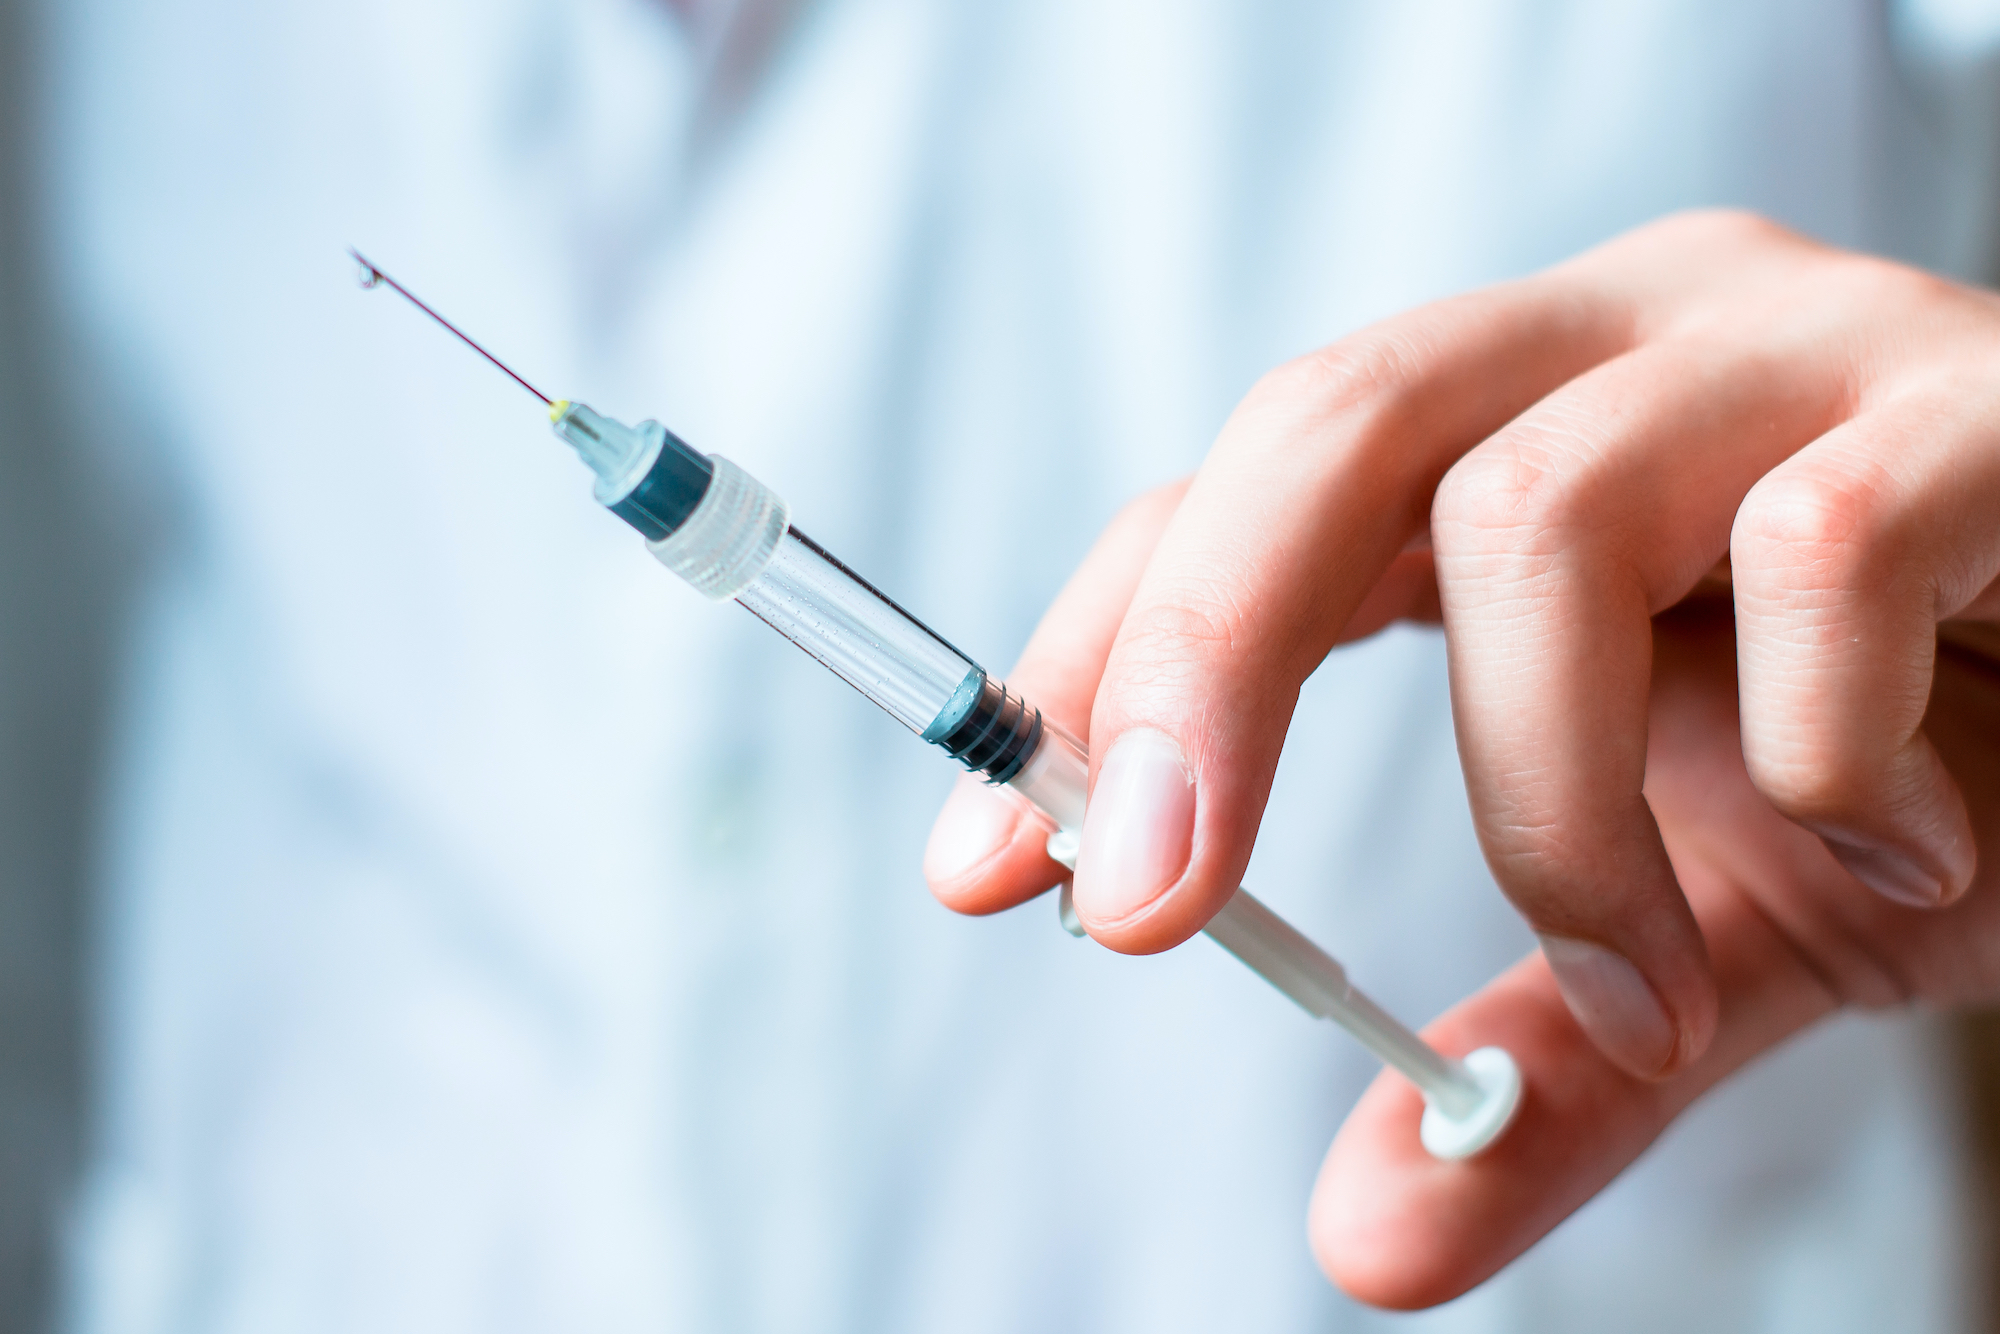 How Should Healthcare Workers Deal With Needlestick Injuries Team Law